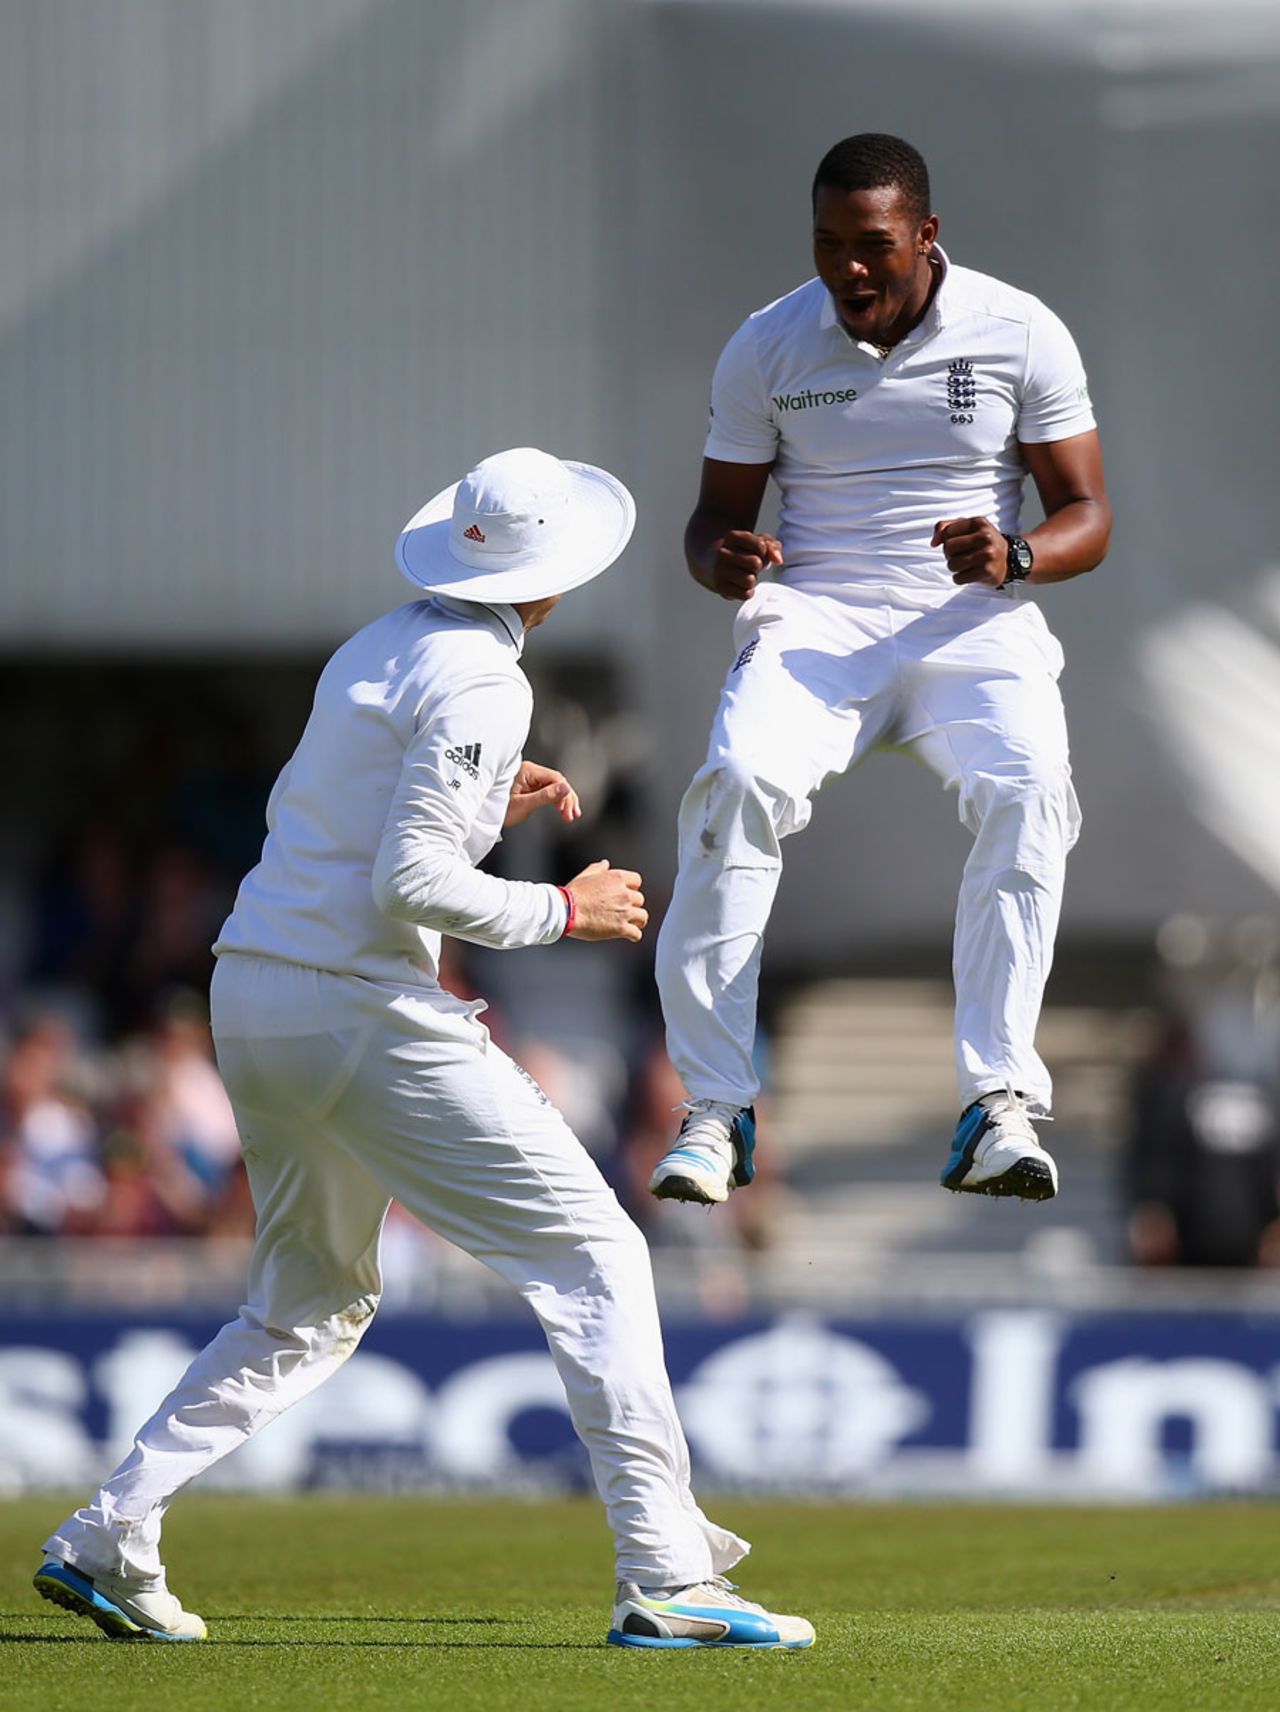 Chris Jordan hurt the Indian tail, England v India, 5th Investec Test, The Oval, 3rd day, August 17, 2014